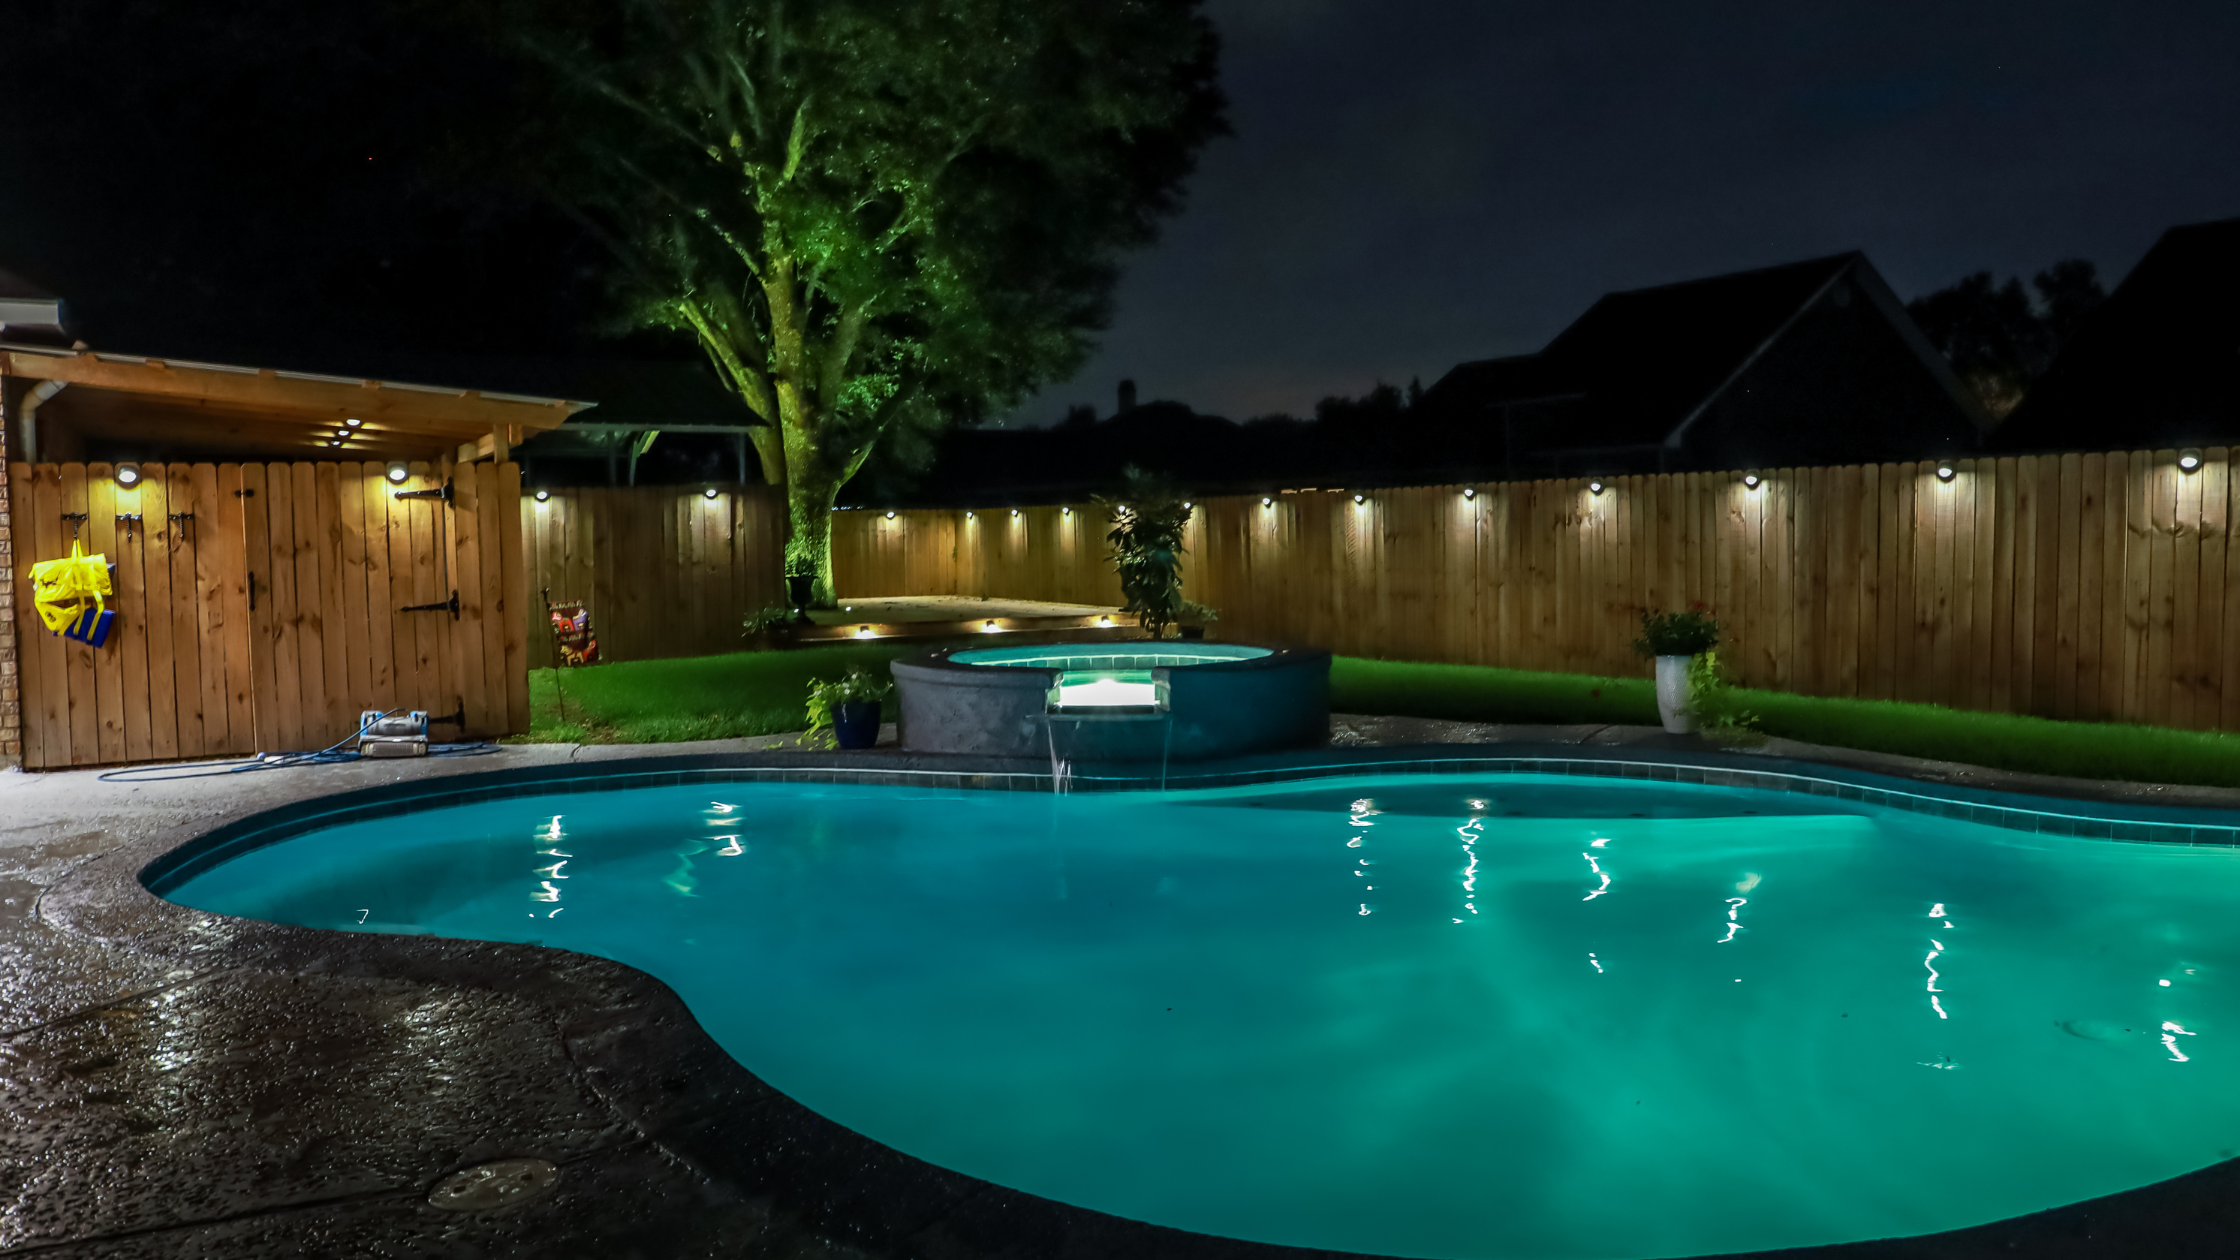 Landscape Lighting, Outdoor Living Experience